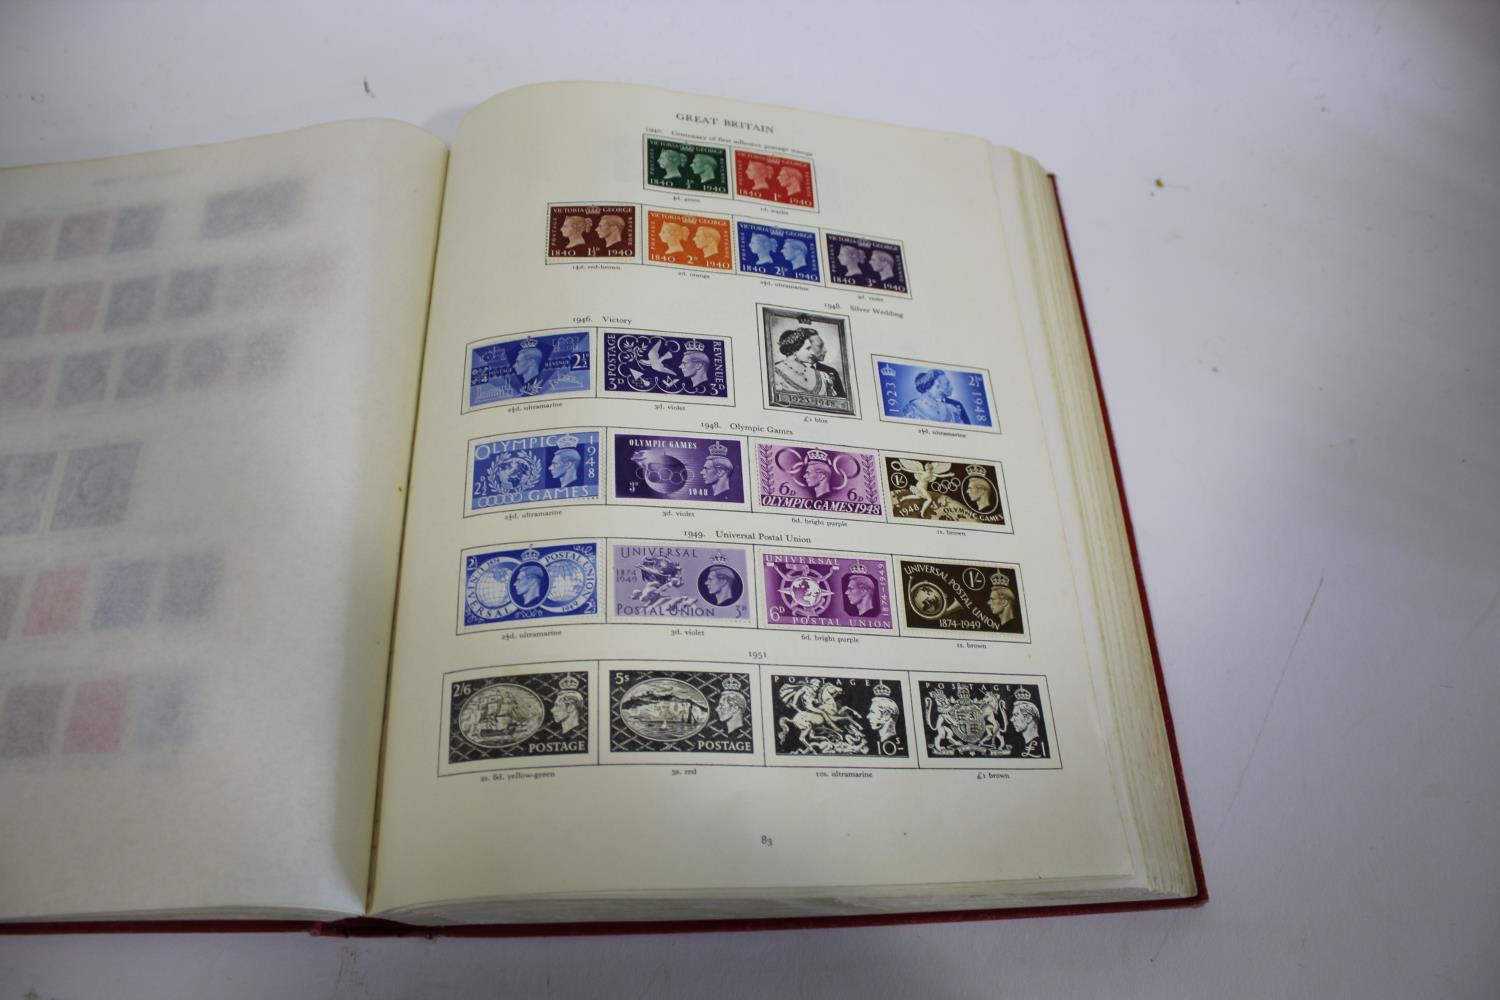 GREAT BRITAIN & COMMONWEALTH STAMPS including a Windsor Album (various used content including 1d